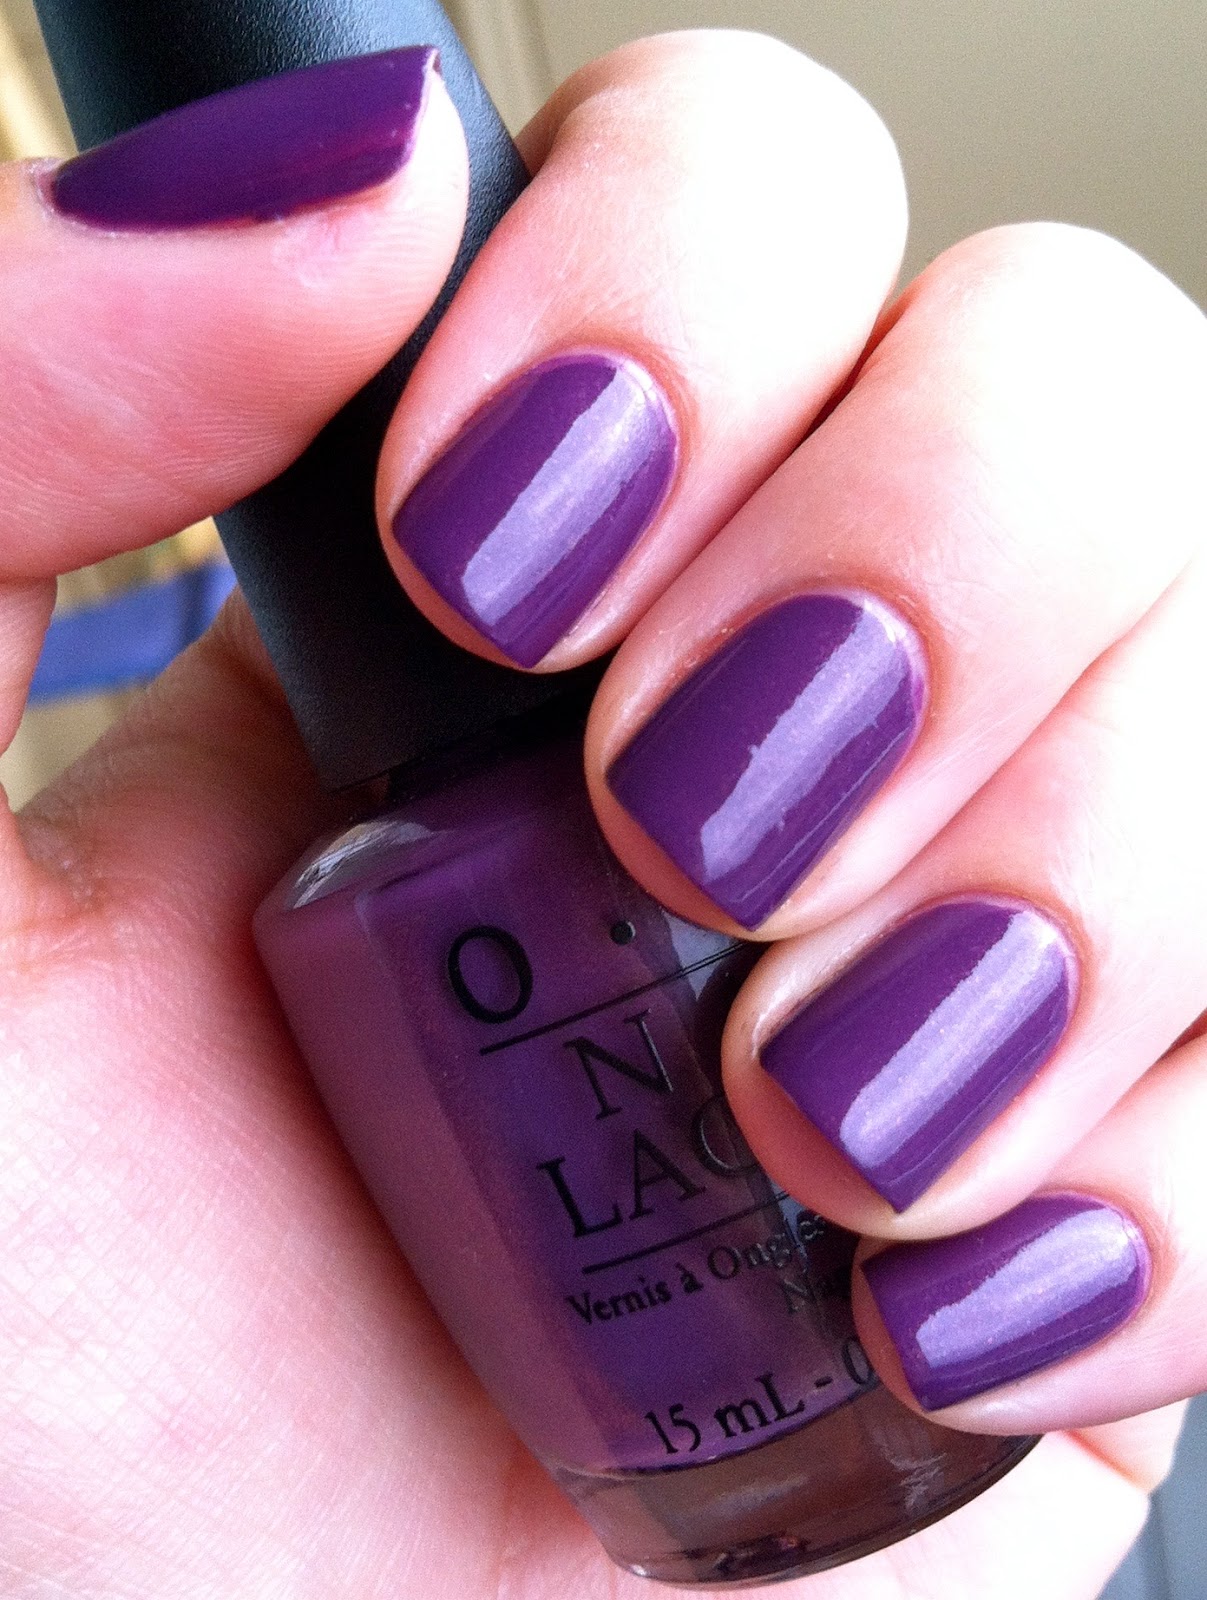 Handtastic Intentions: Swatch and Review of OPI: Dutch 'Ya Just Love OPI?